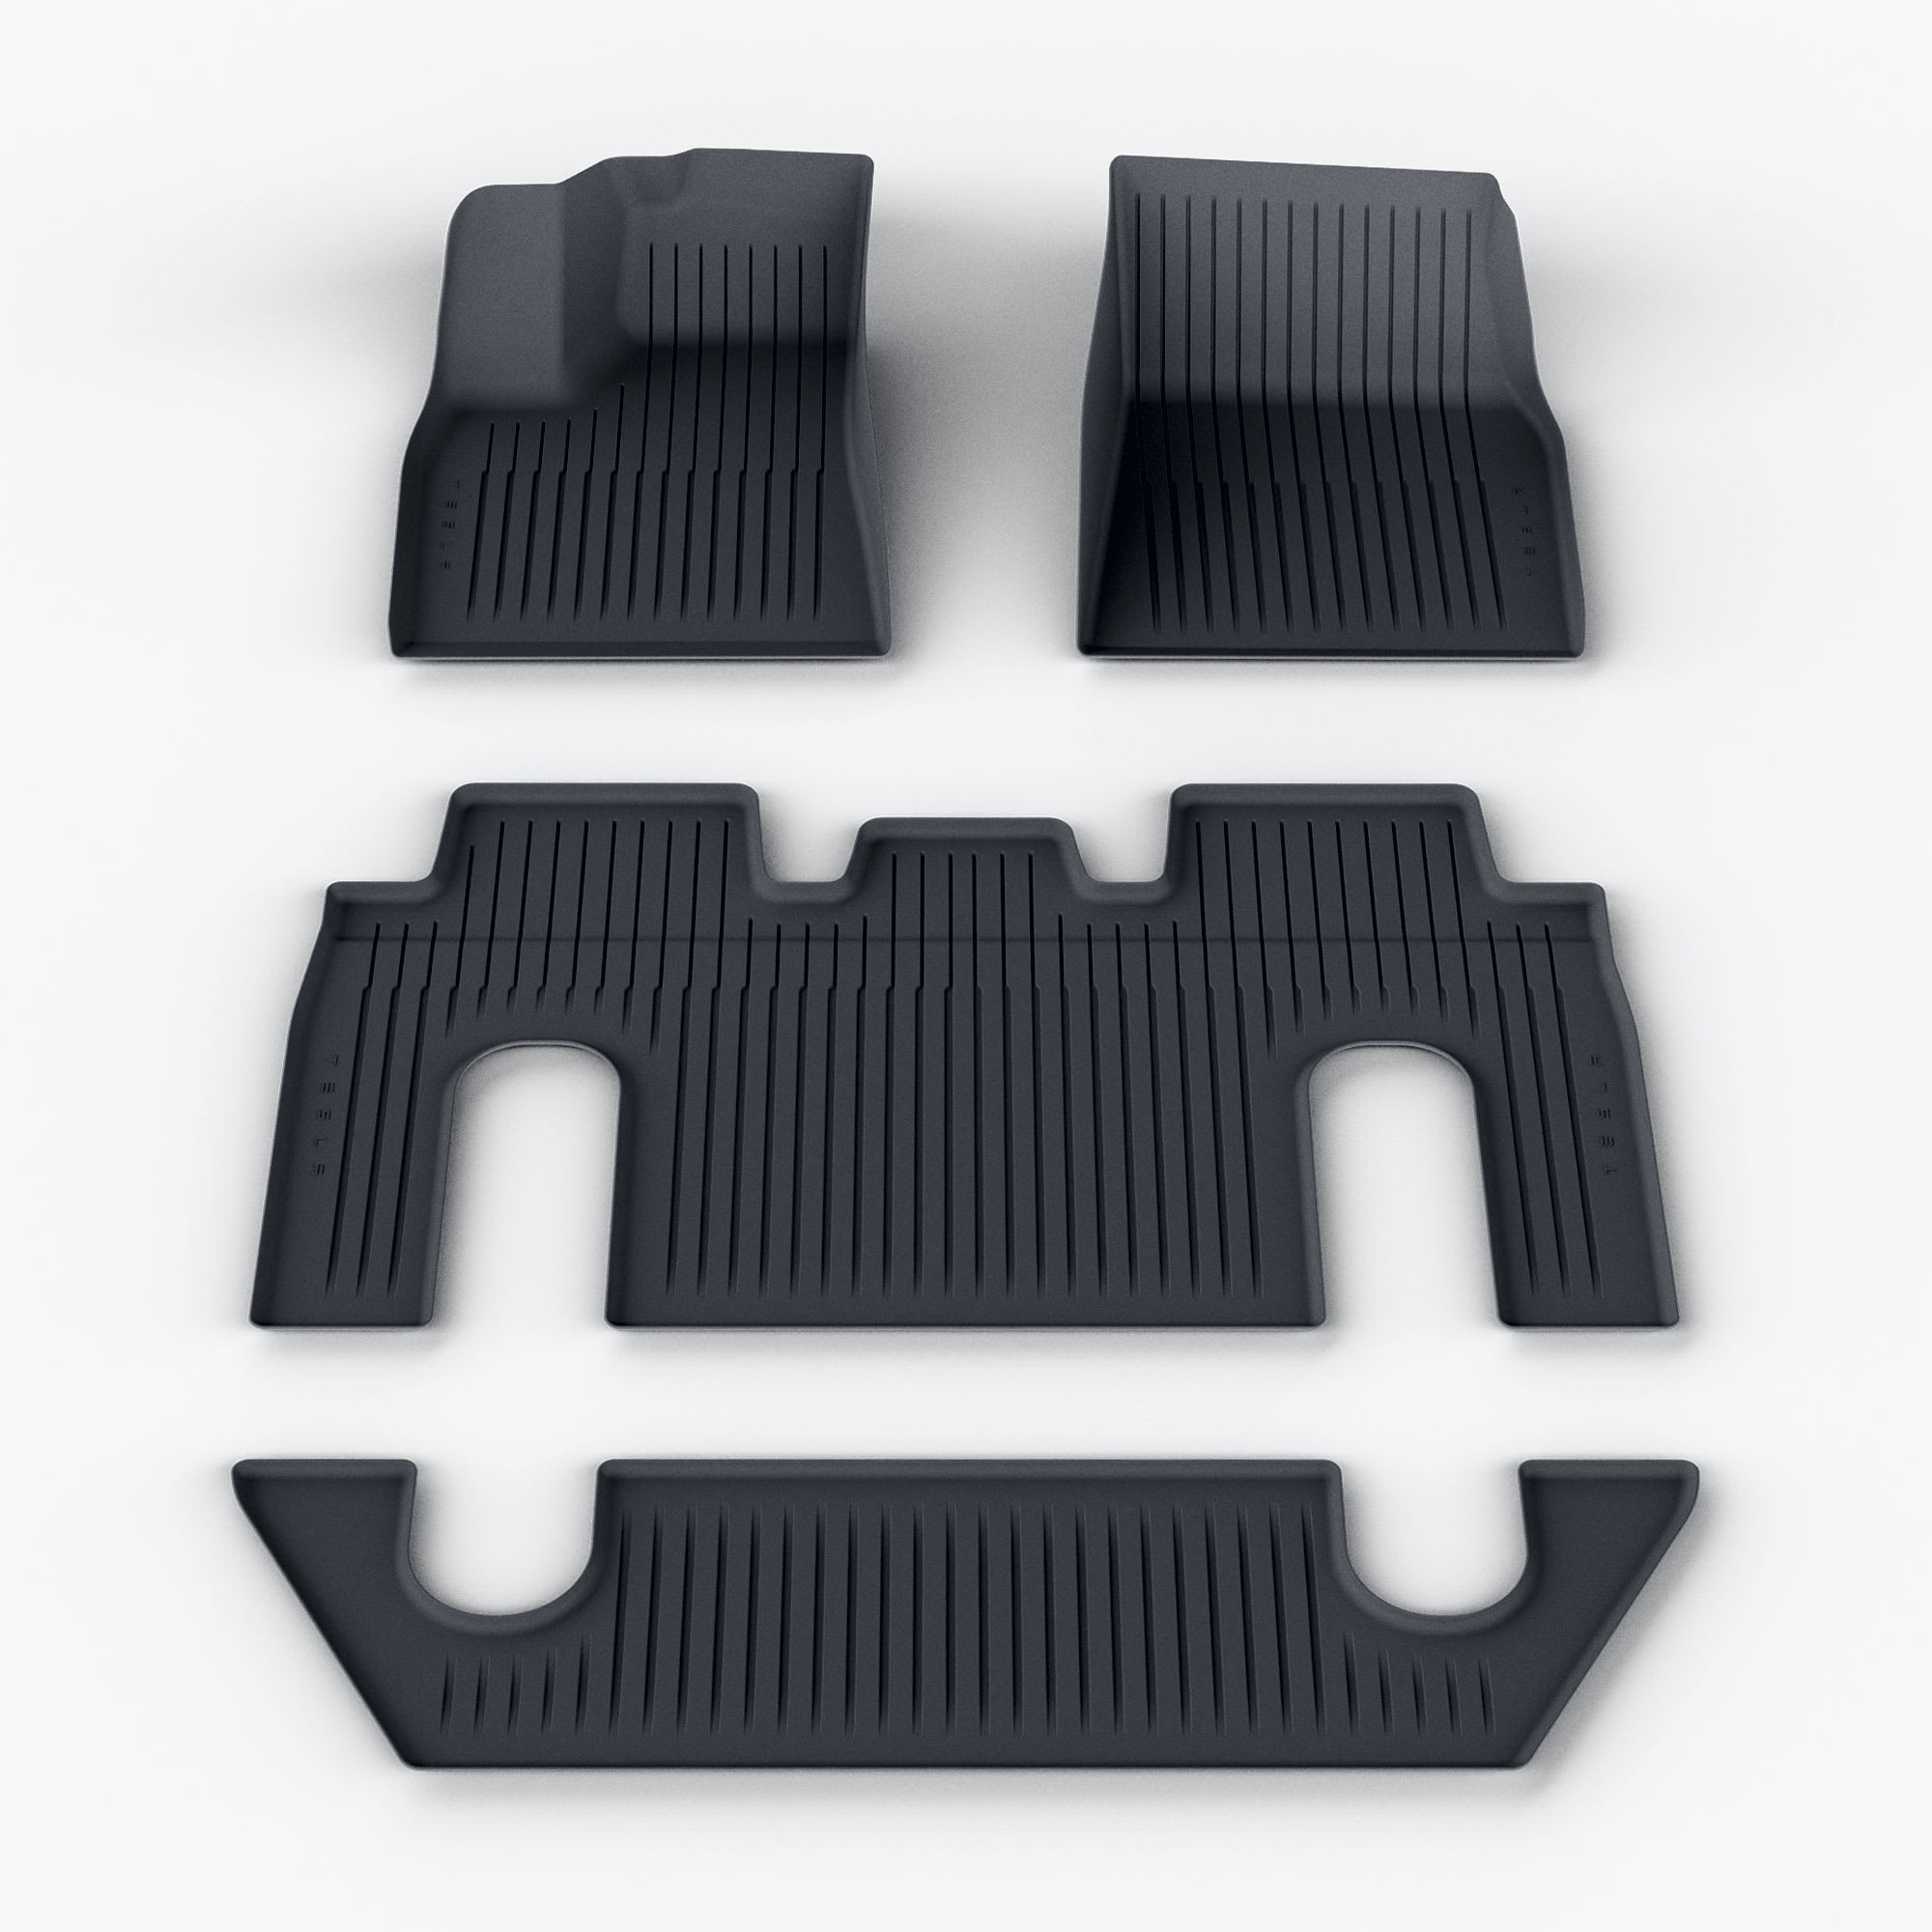 Model X All-Weather Interior Liners - Six Seats